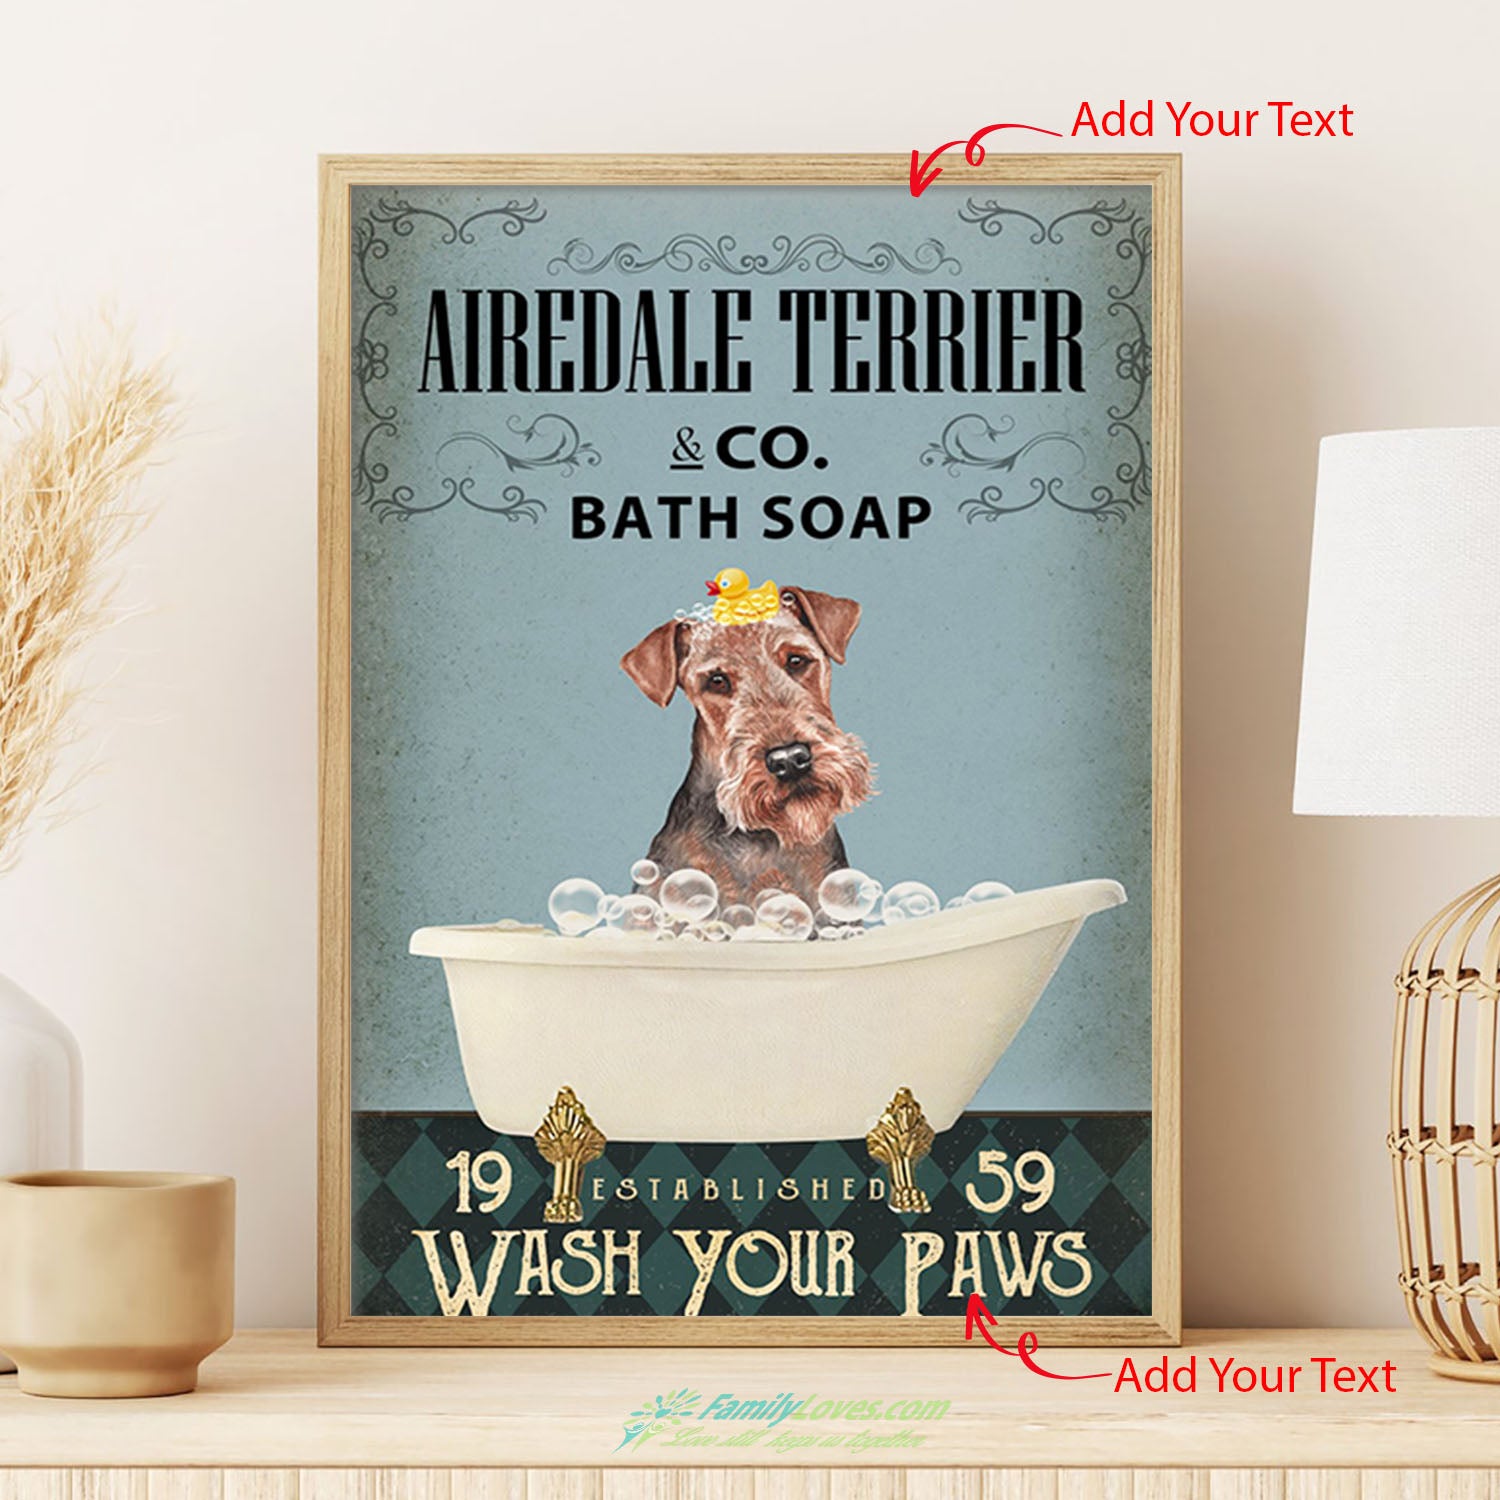 Airedale Terrier Bath Soap Wash Your Paws Large Canvas Wall Art Poster Letters All Size 1